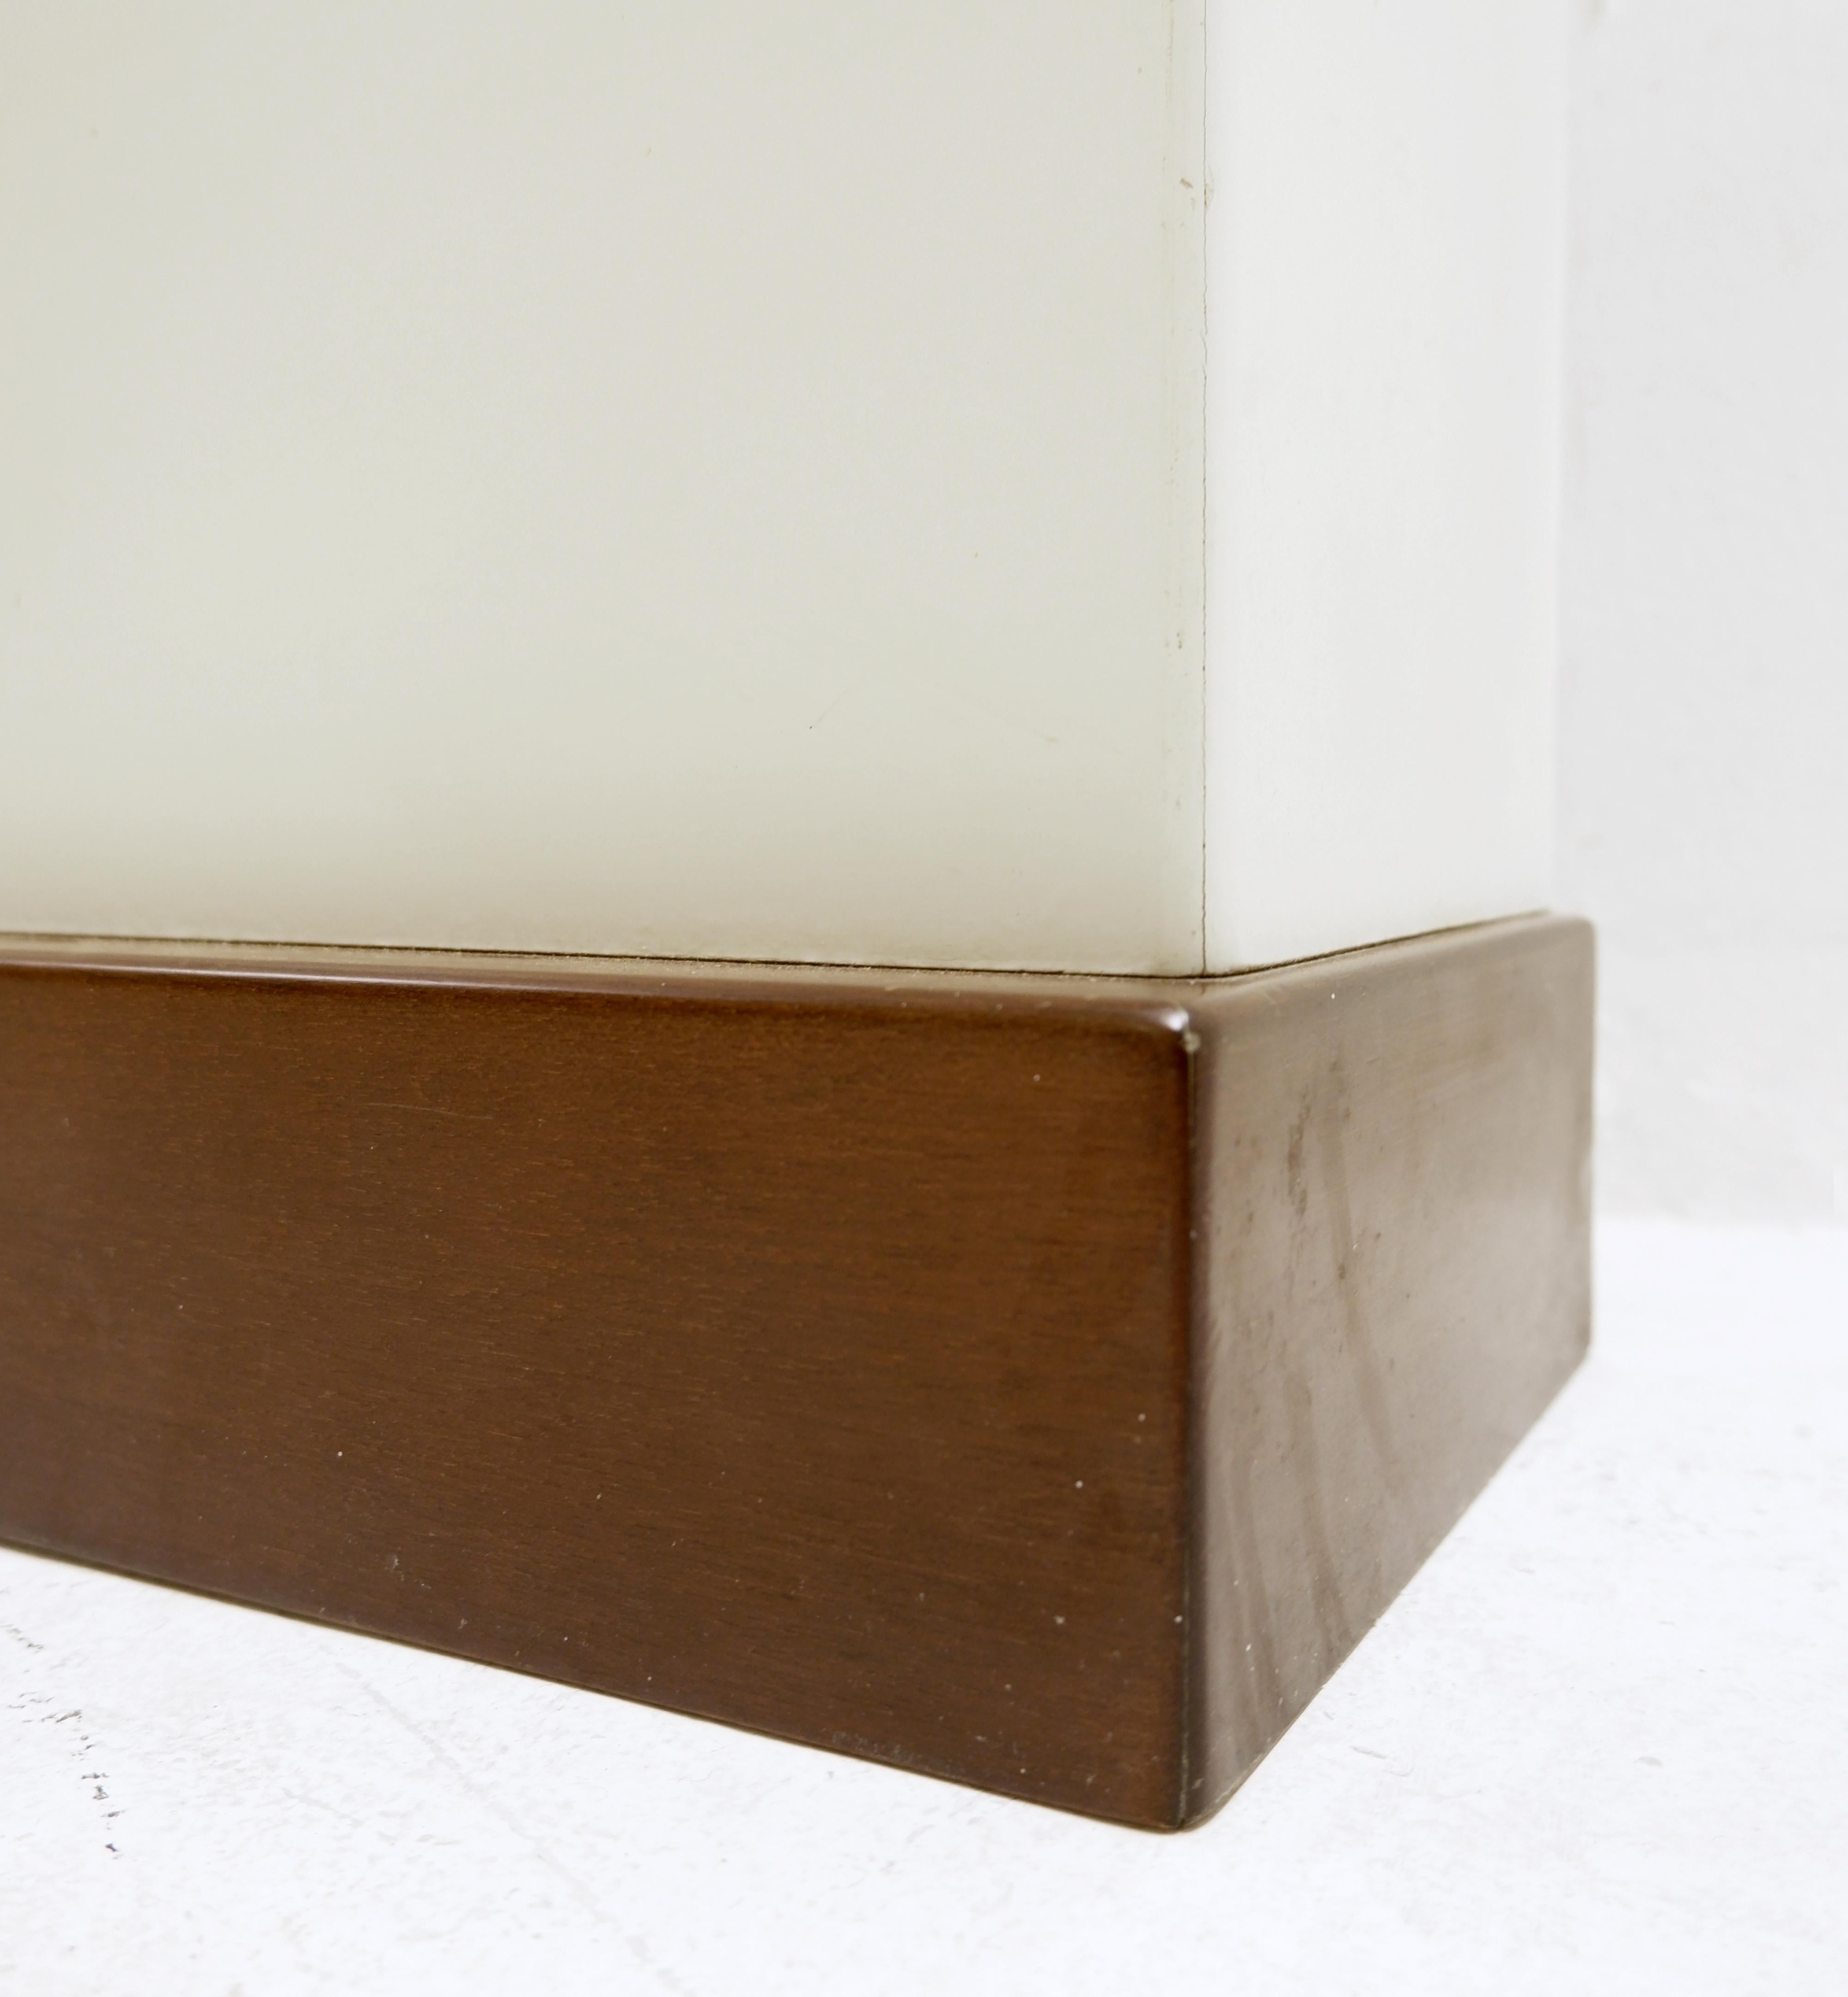 20th Century Mid-century modern Coat Rack by Carlo di Carli for Fiarm - 1960s For Sale